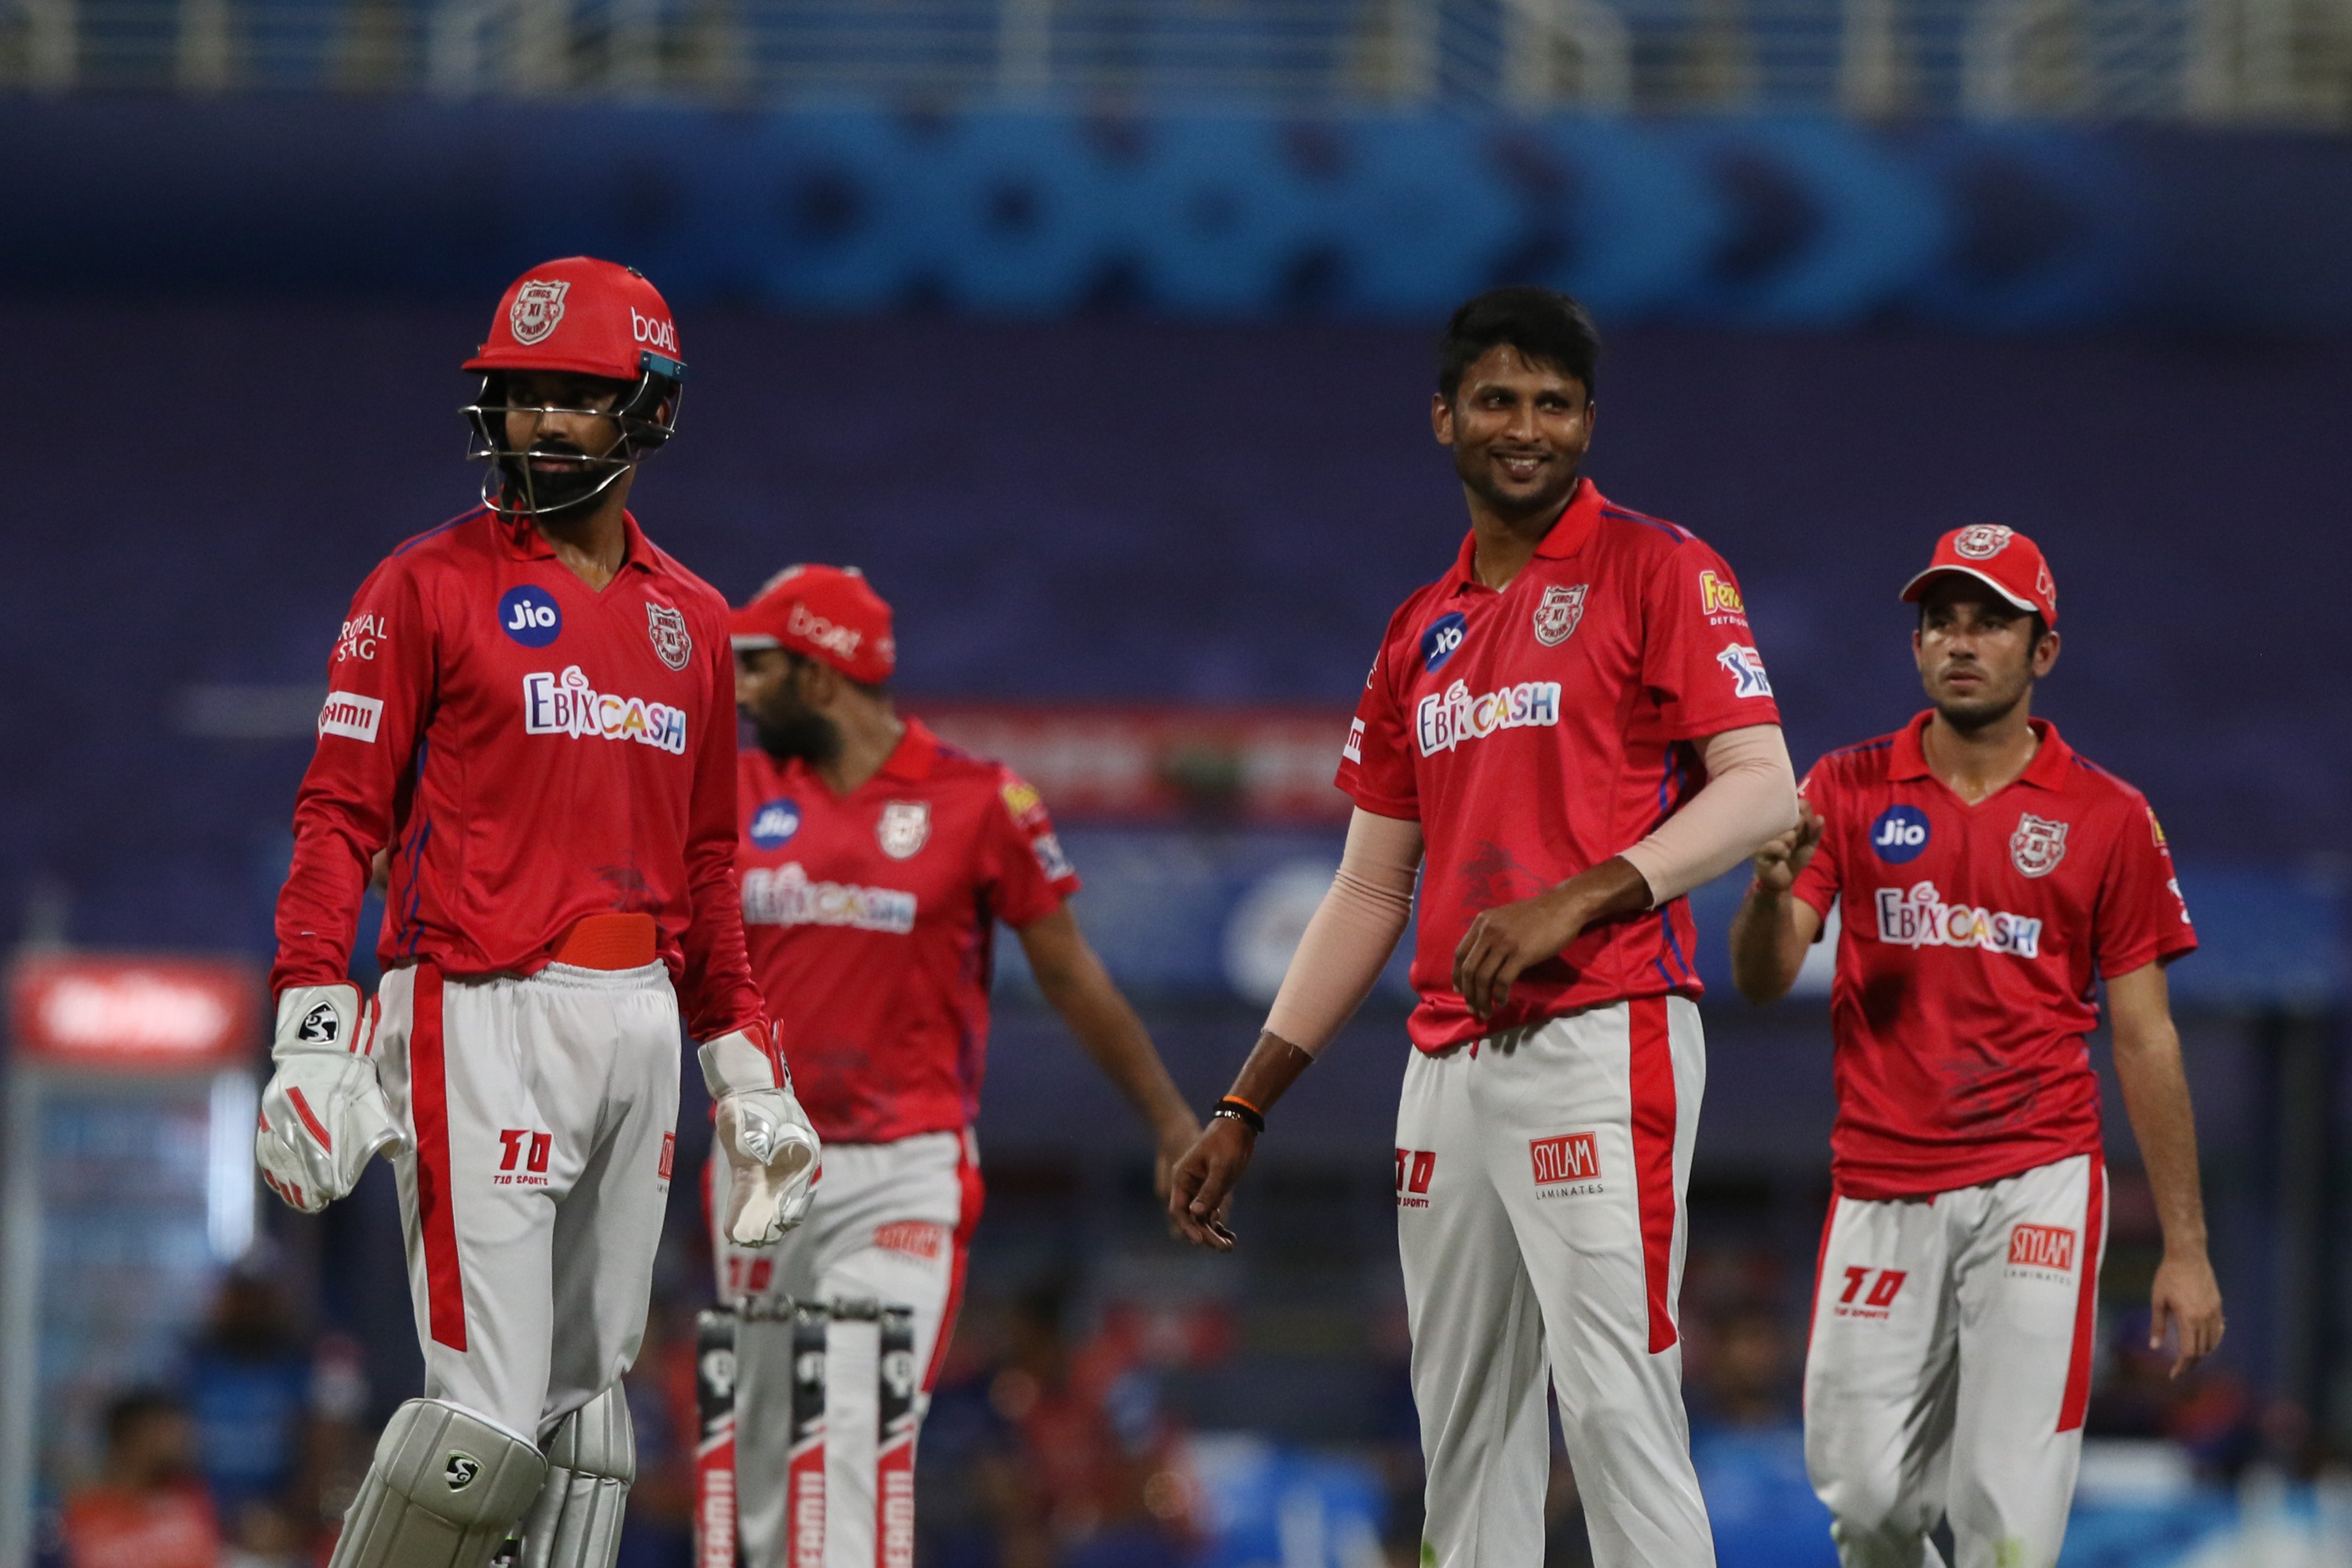 How KL Rahul’s Kings XI Punjab found themselves struggling at 1-3 and not cruising at 3-1